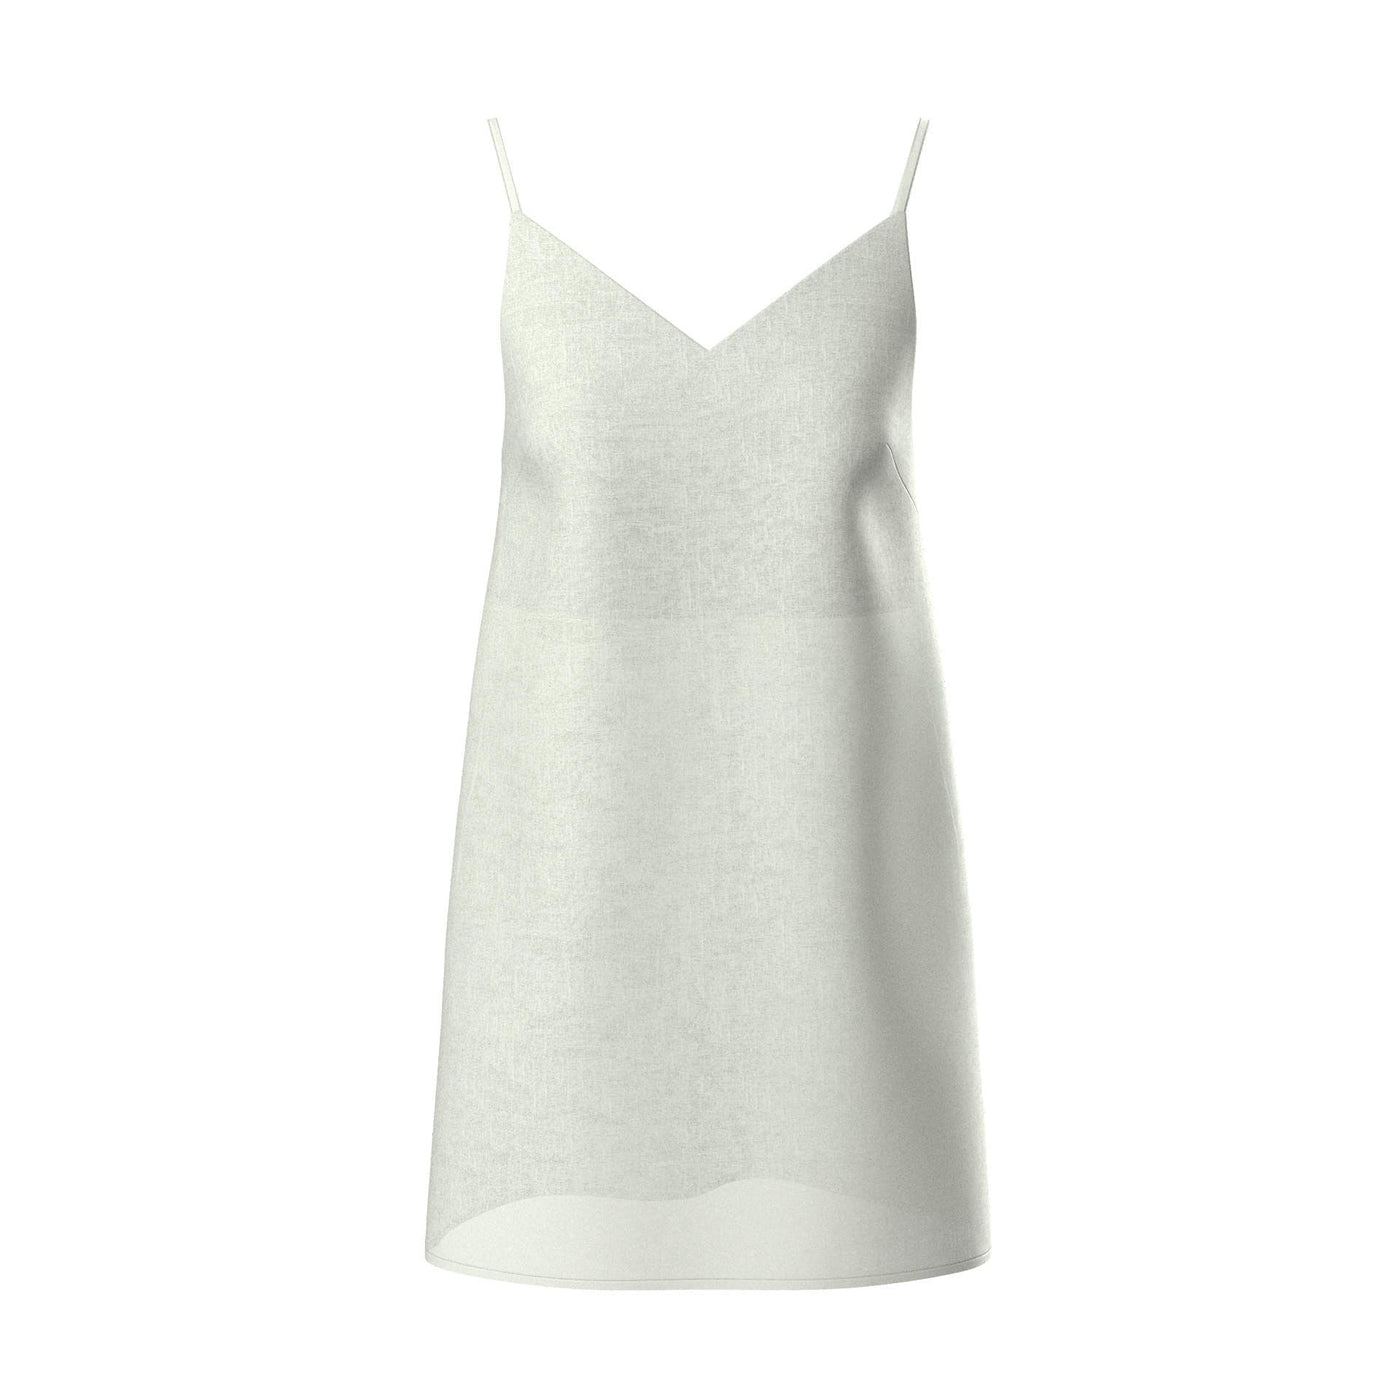 Lilly Pilly Collection 100% organic linen Liz slip dress in Tea as 3D model showing front view